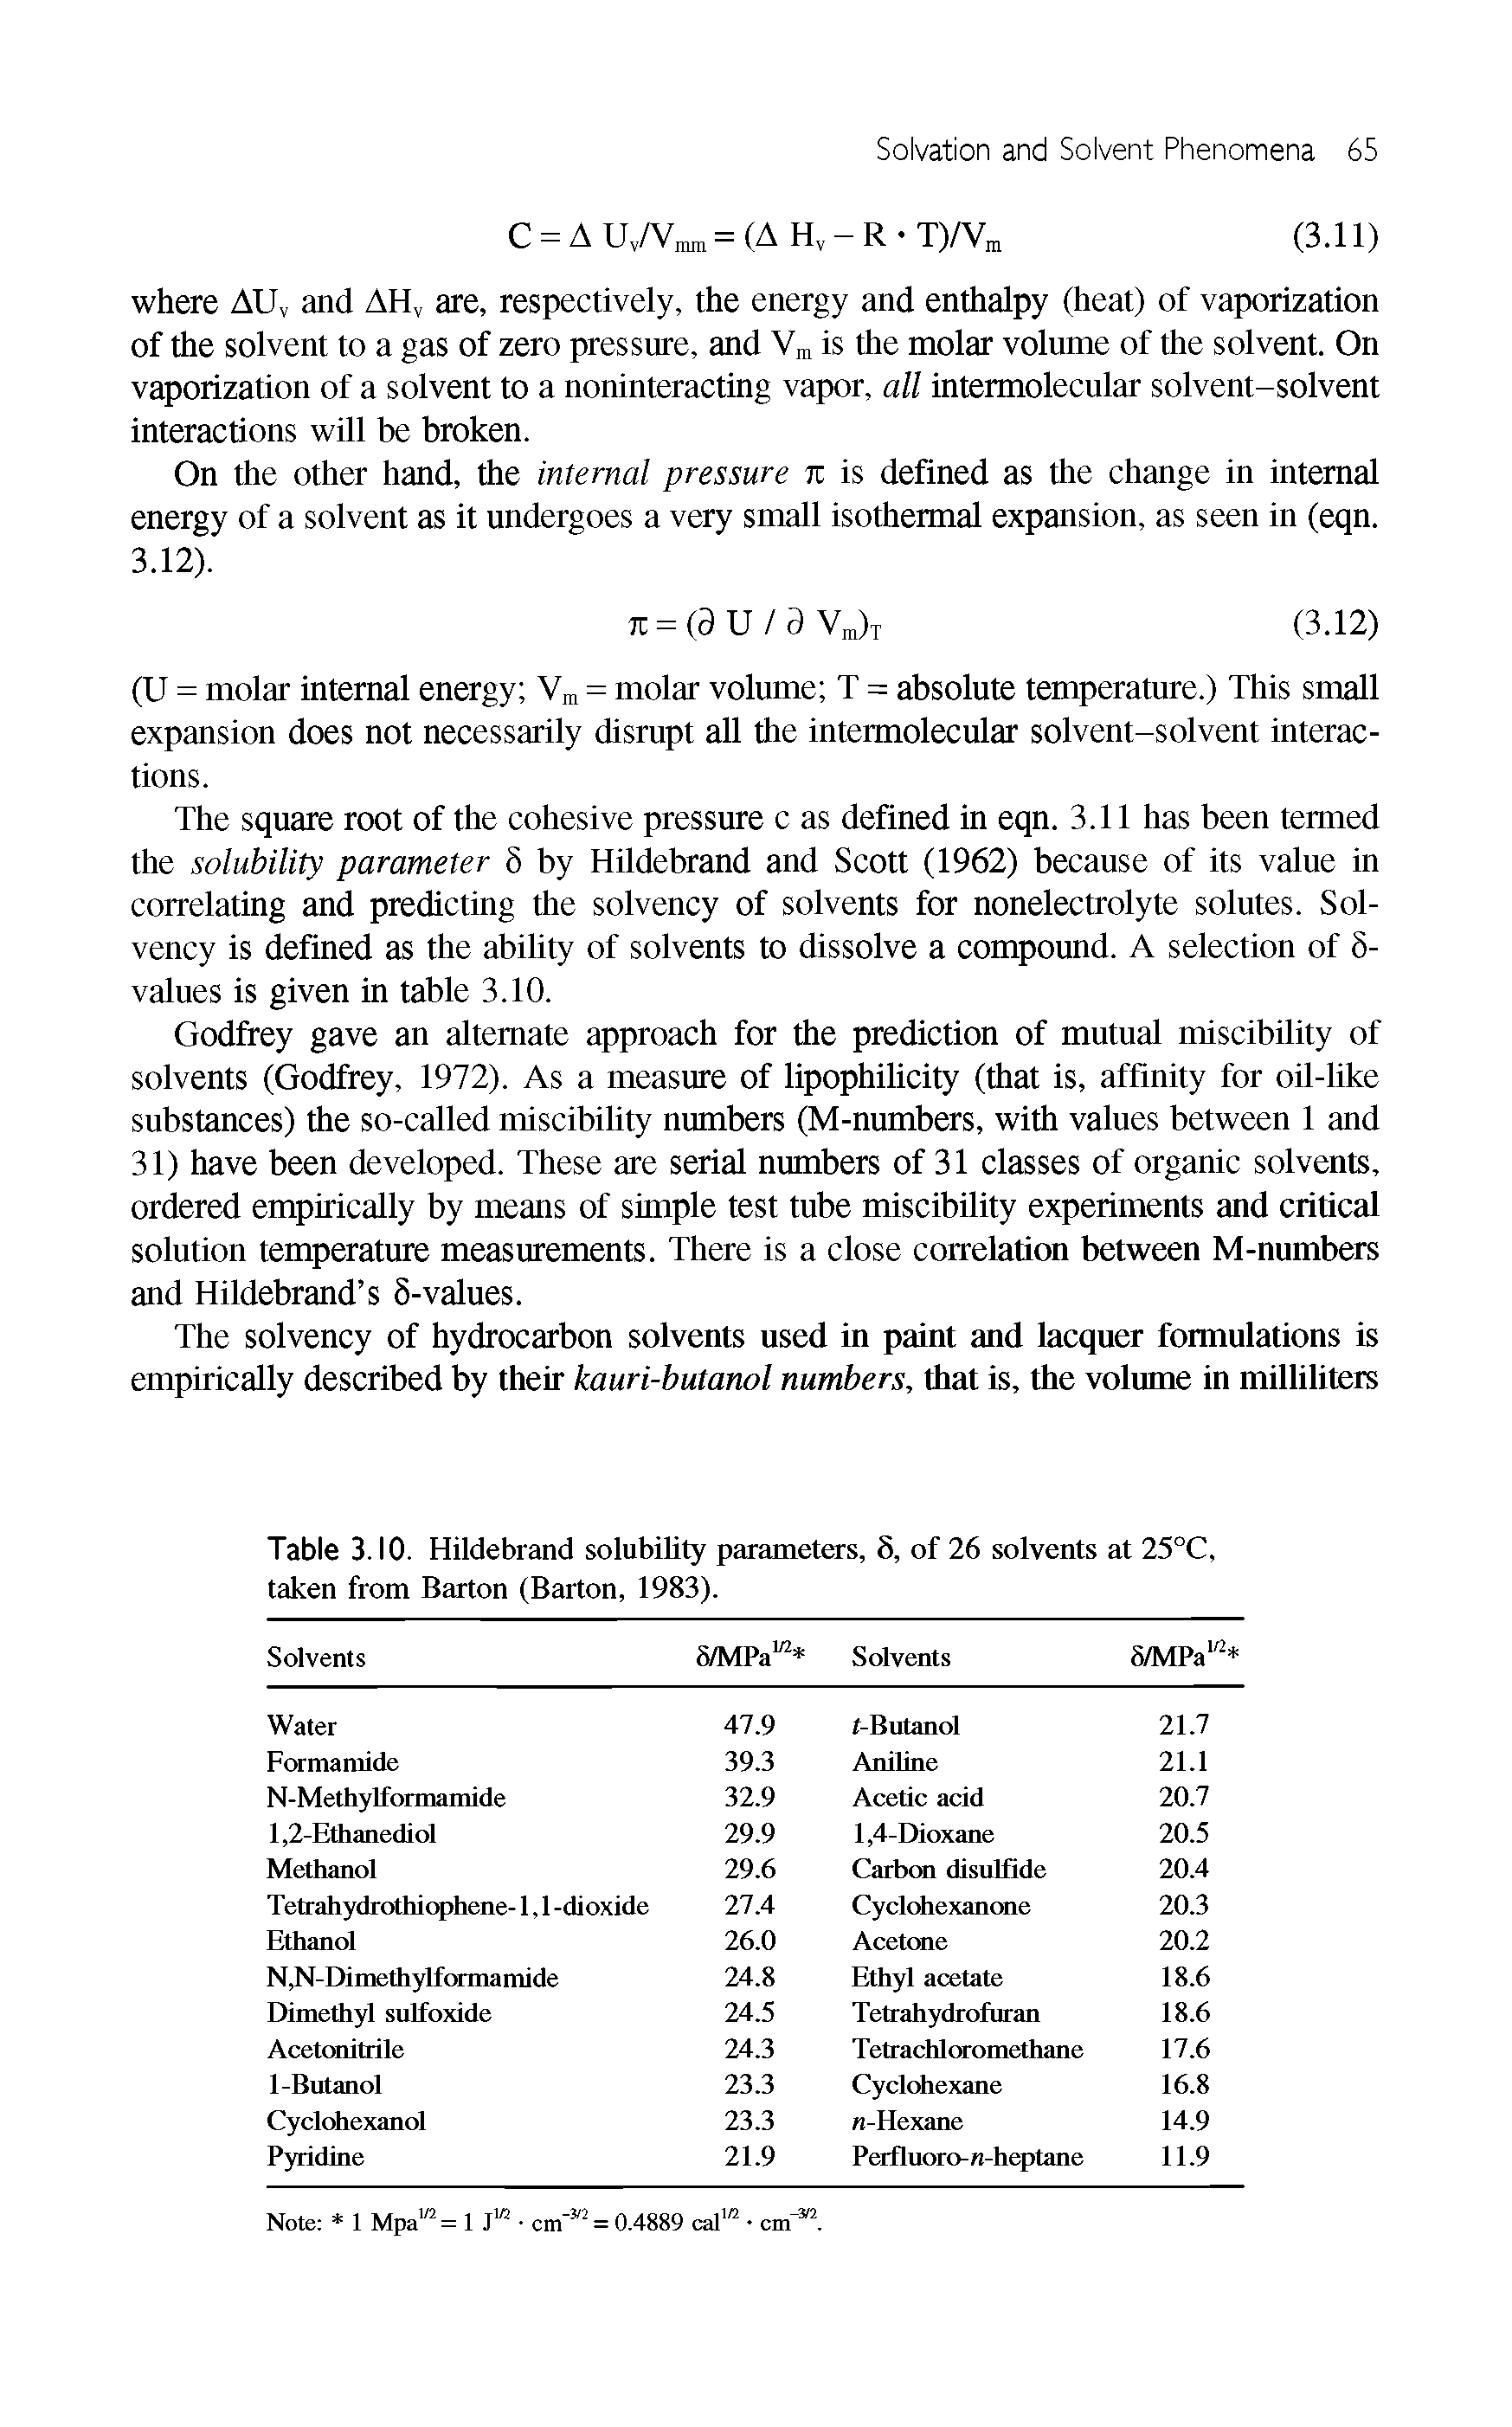 Table 3.10. Hildebrand solubility parameters, 5, of 26 solvents at 25°C, taken from Barton (Barton, 1983).